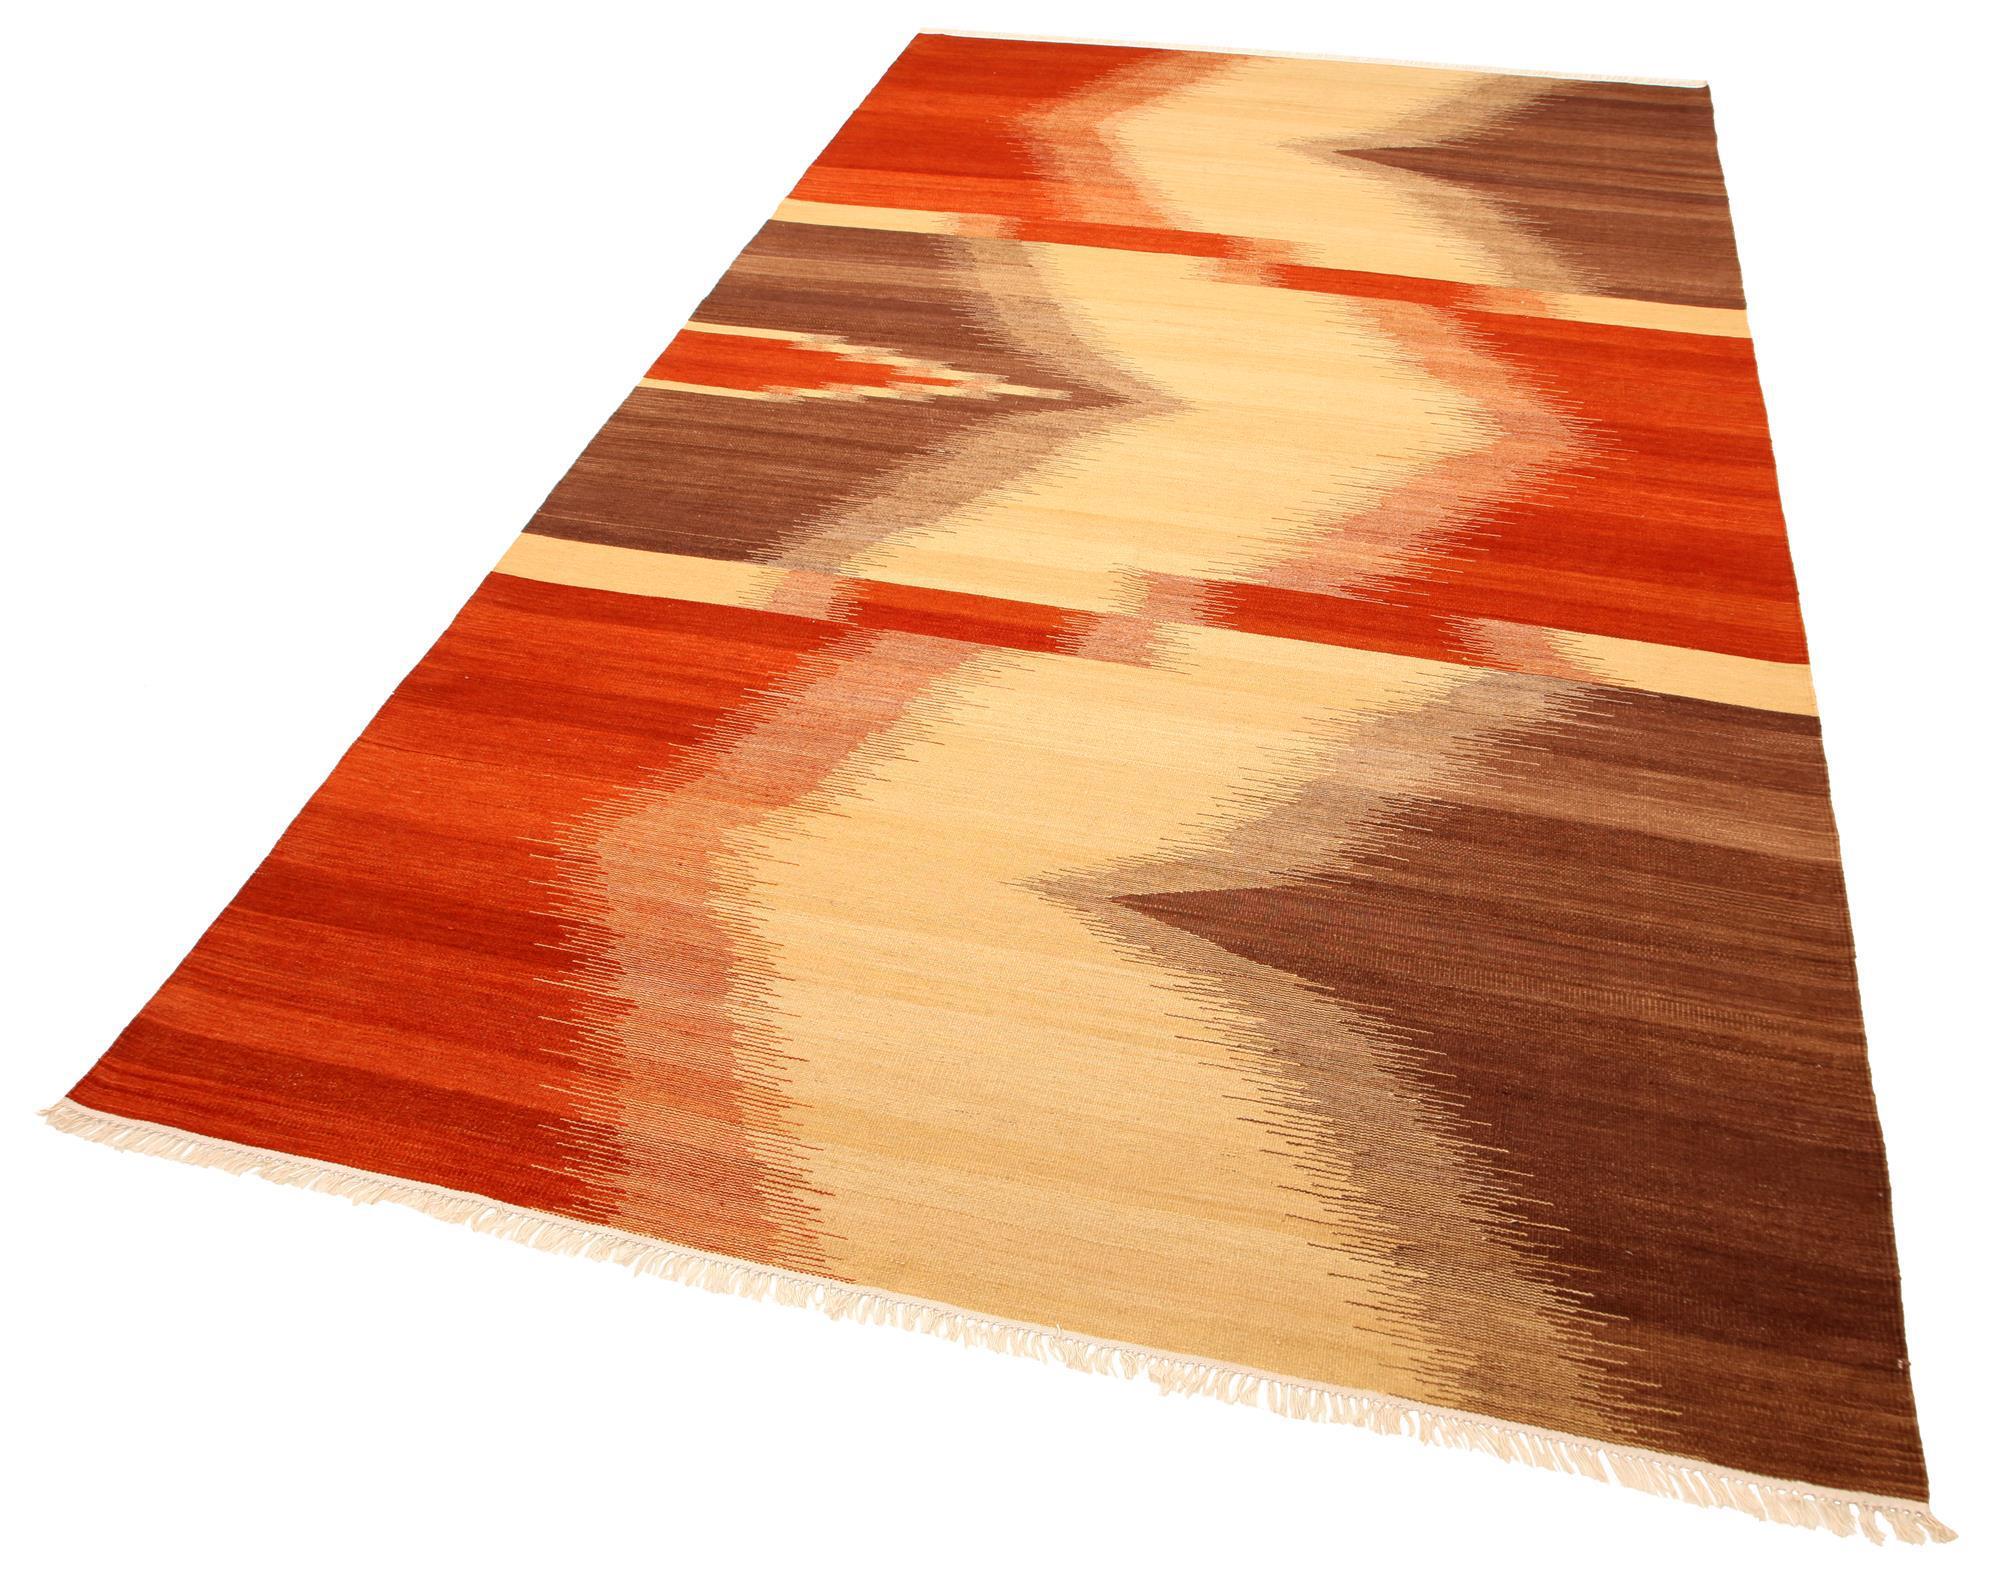 Contemporary cotton wool Kilim with abstract patterns in colors of red, brown and cream.